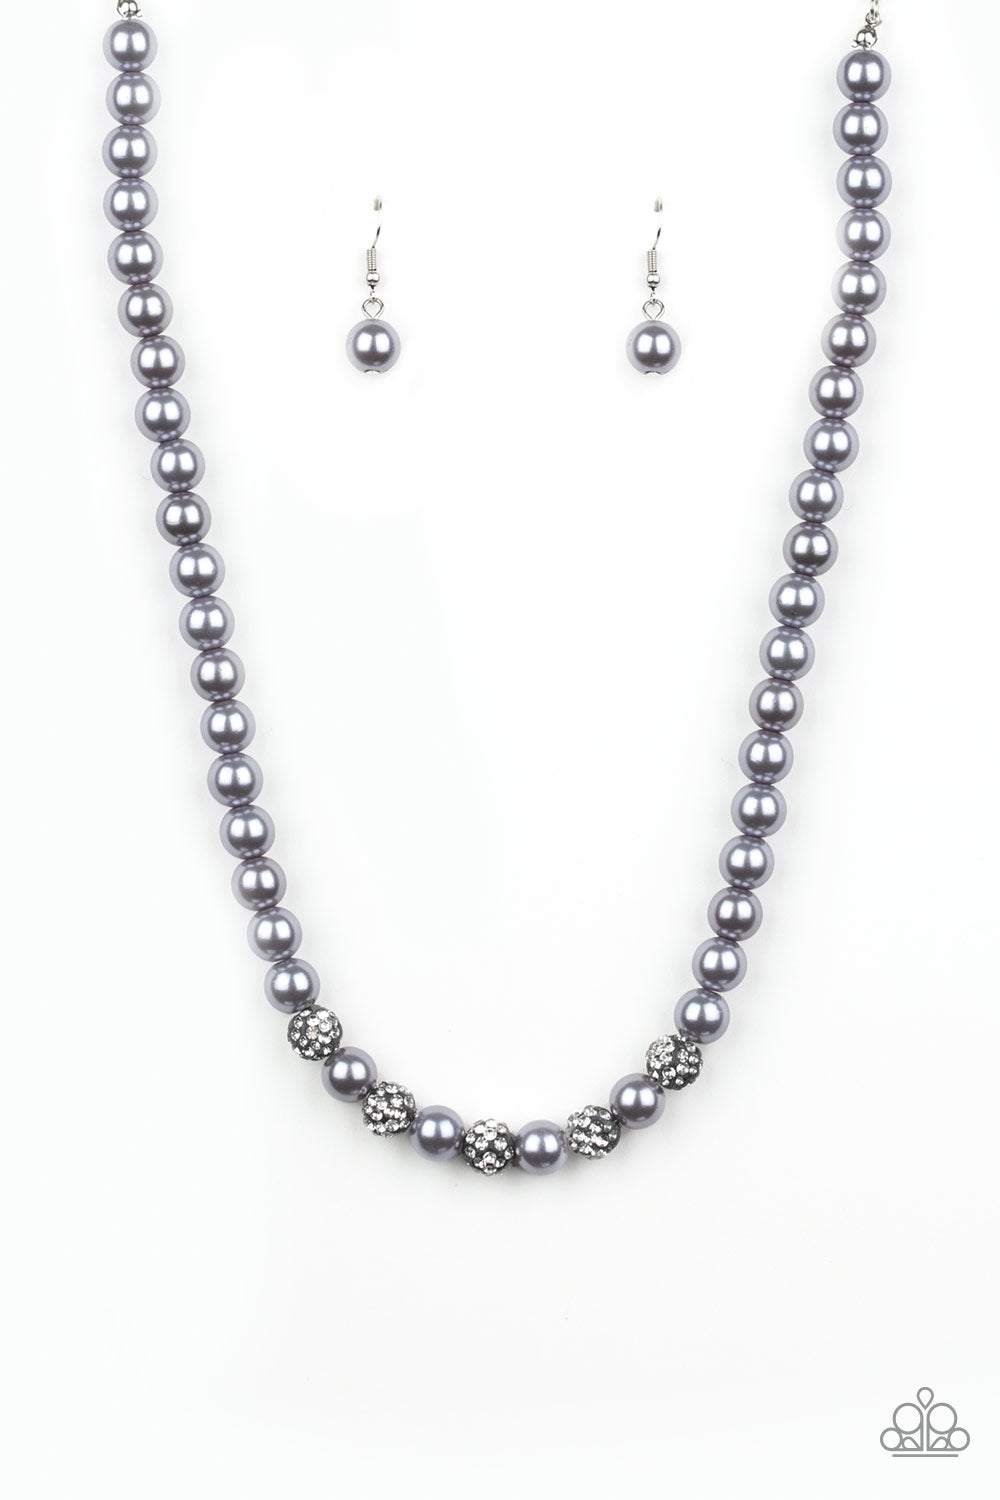 Posh Boss - Silver Necklace - TheMasterCollection